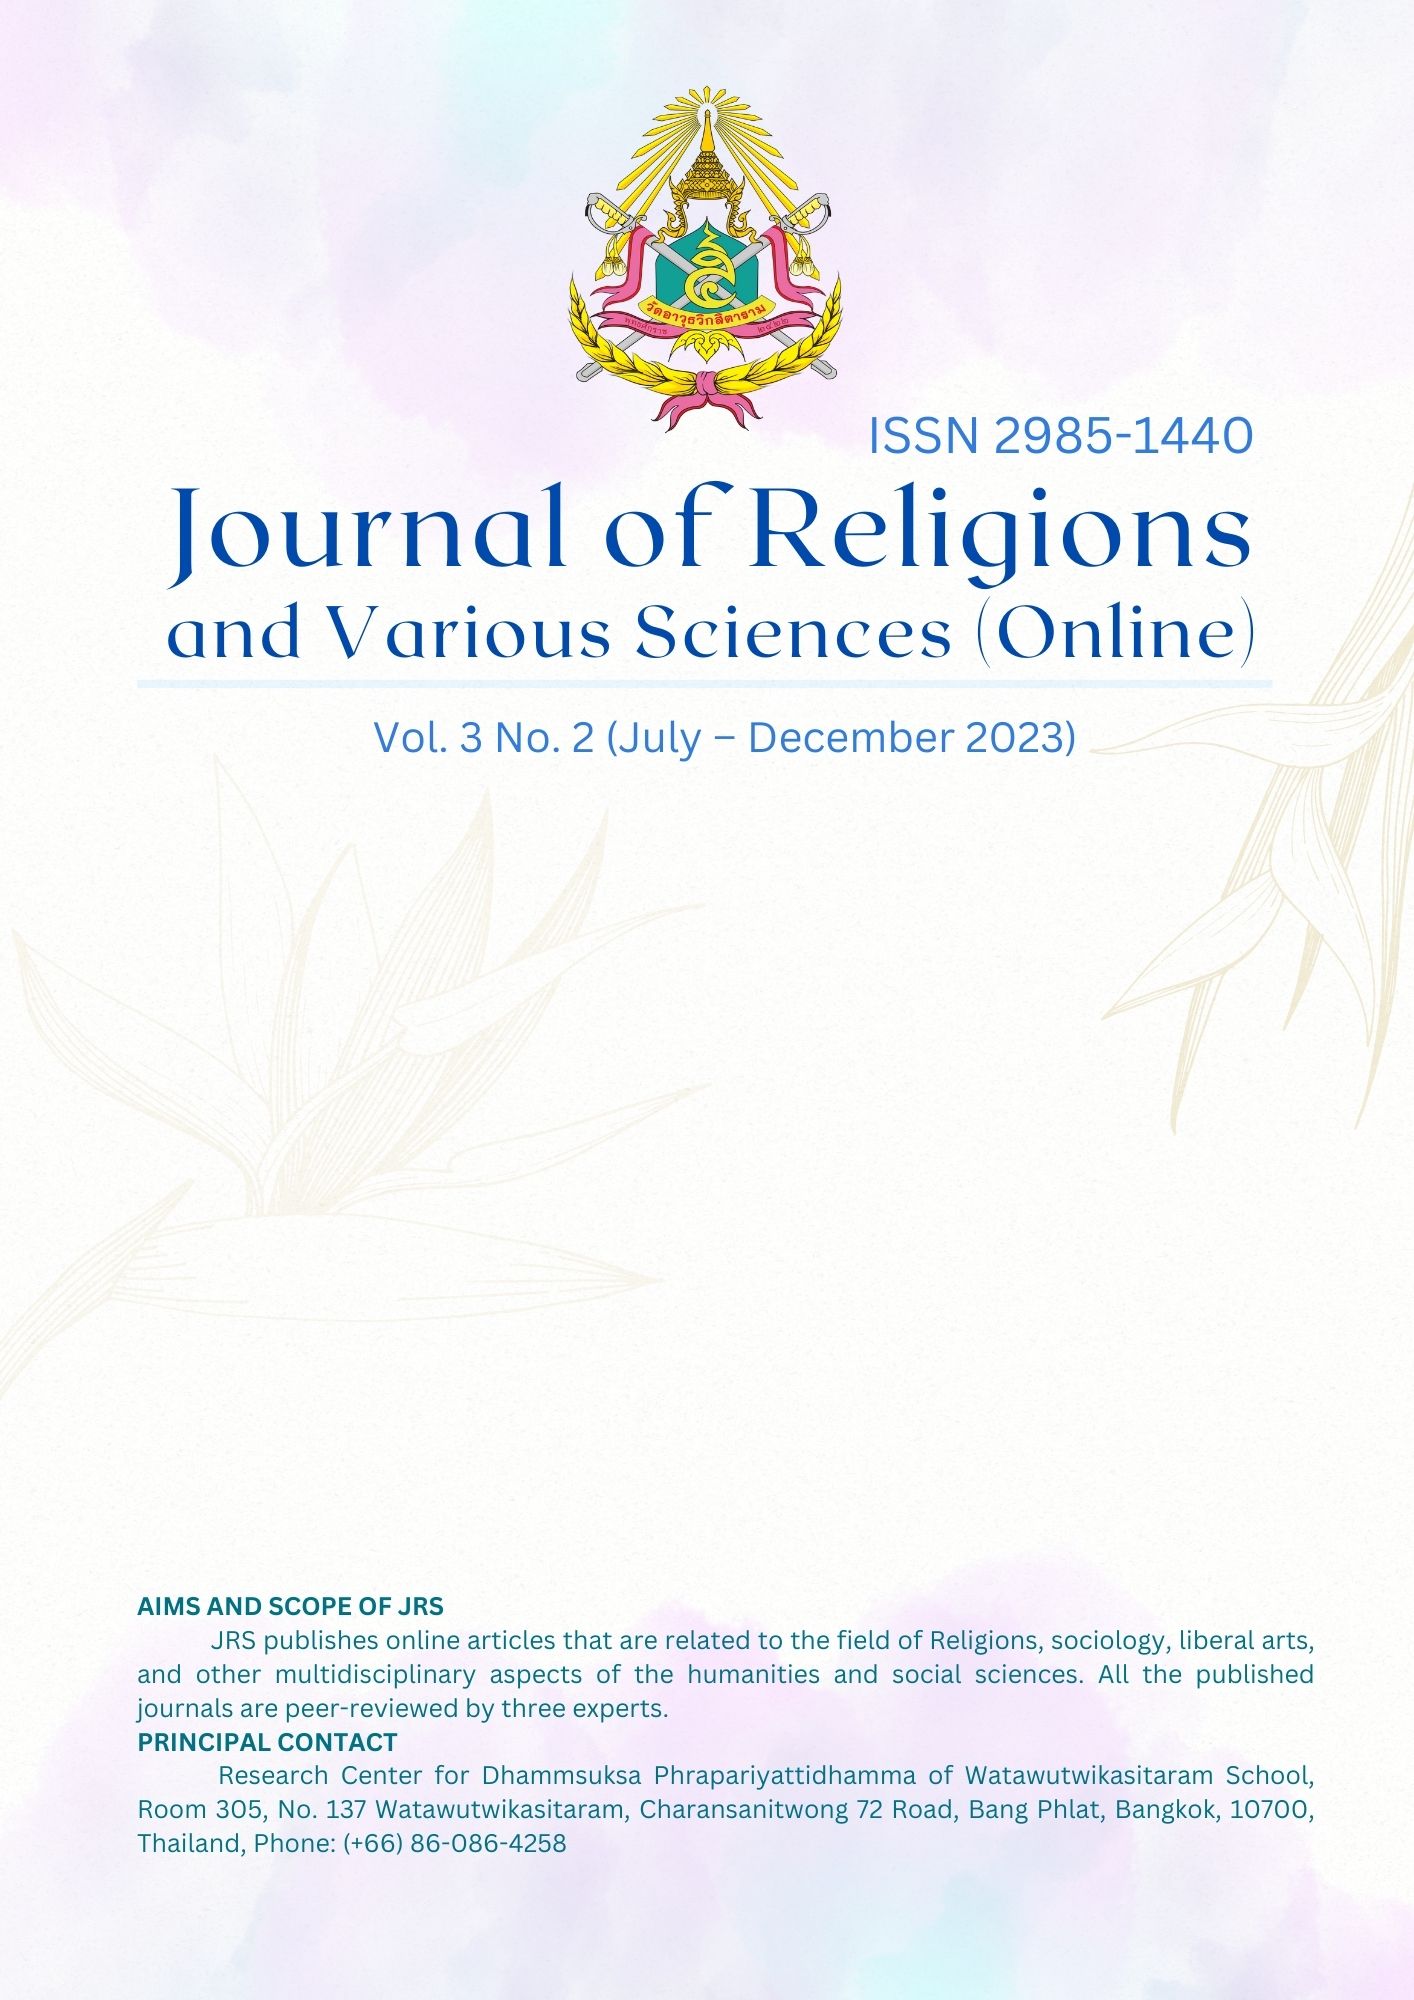 Journal of Religions and Various Sciences thumbnail